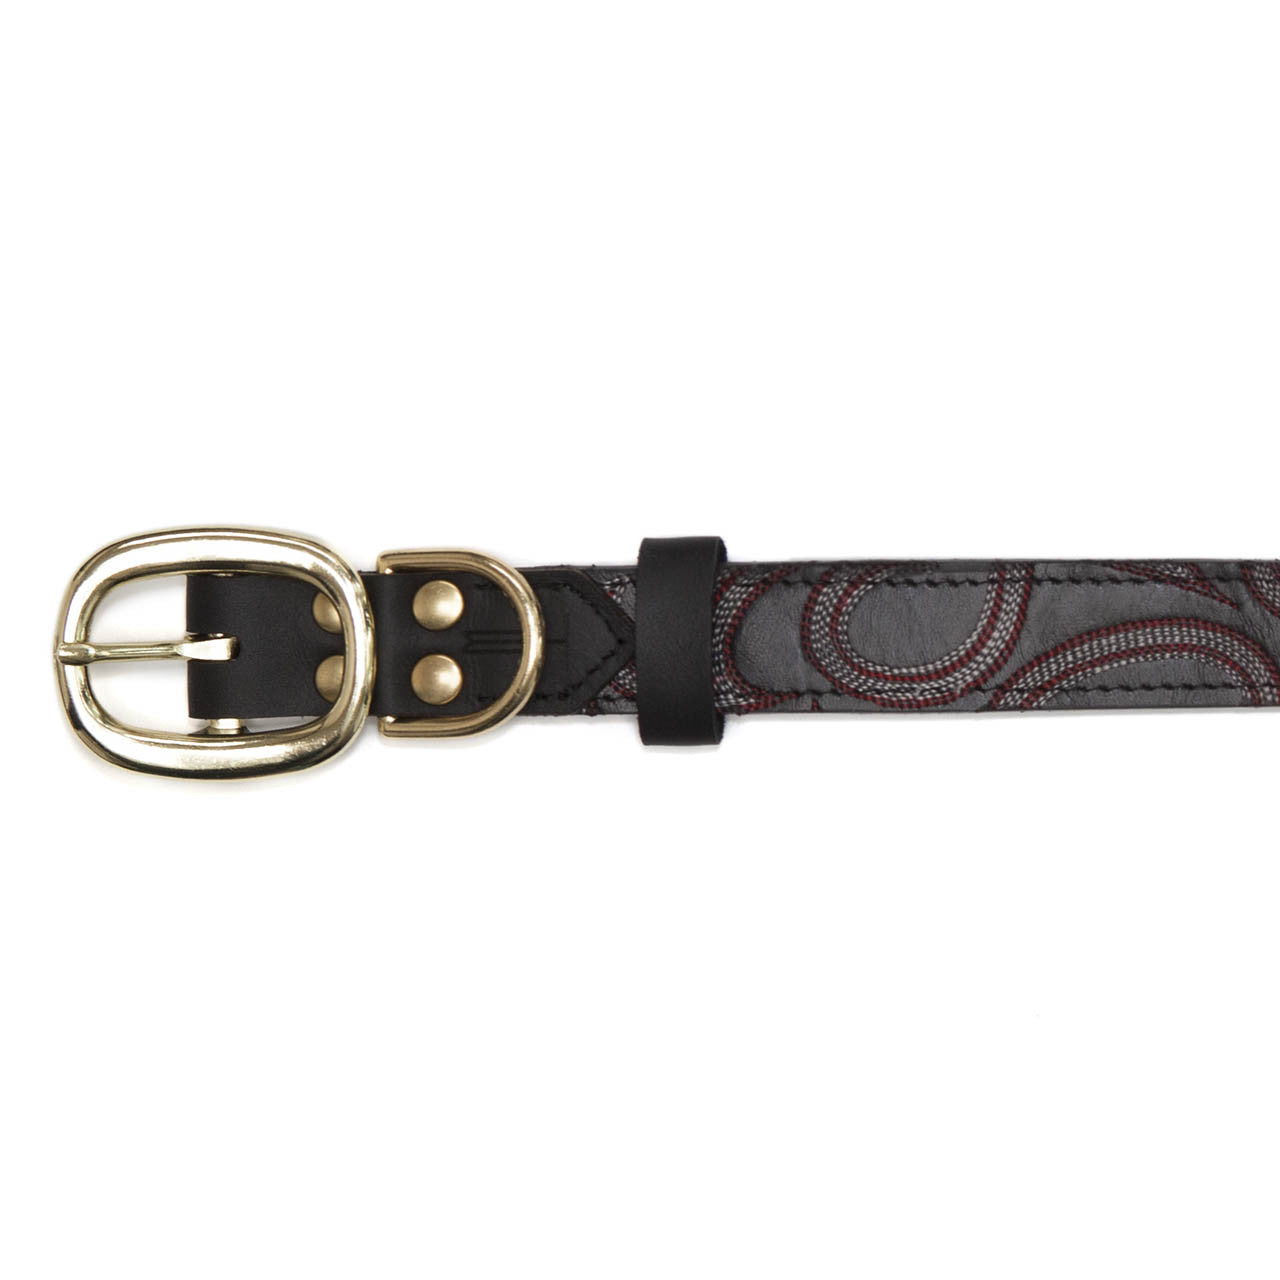 Black Dog Collar with Black Leather + Red/White Crest Stitching (buckle)